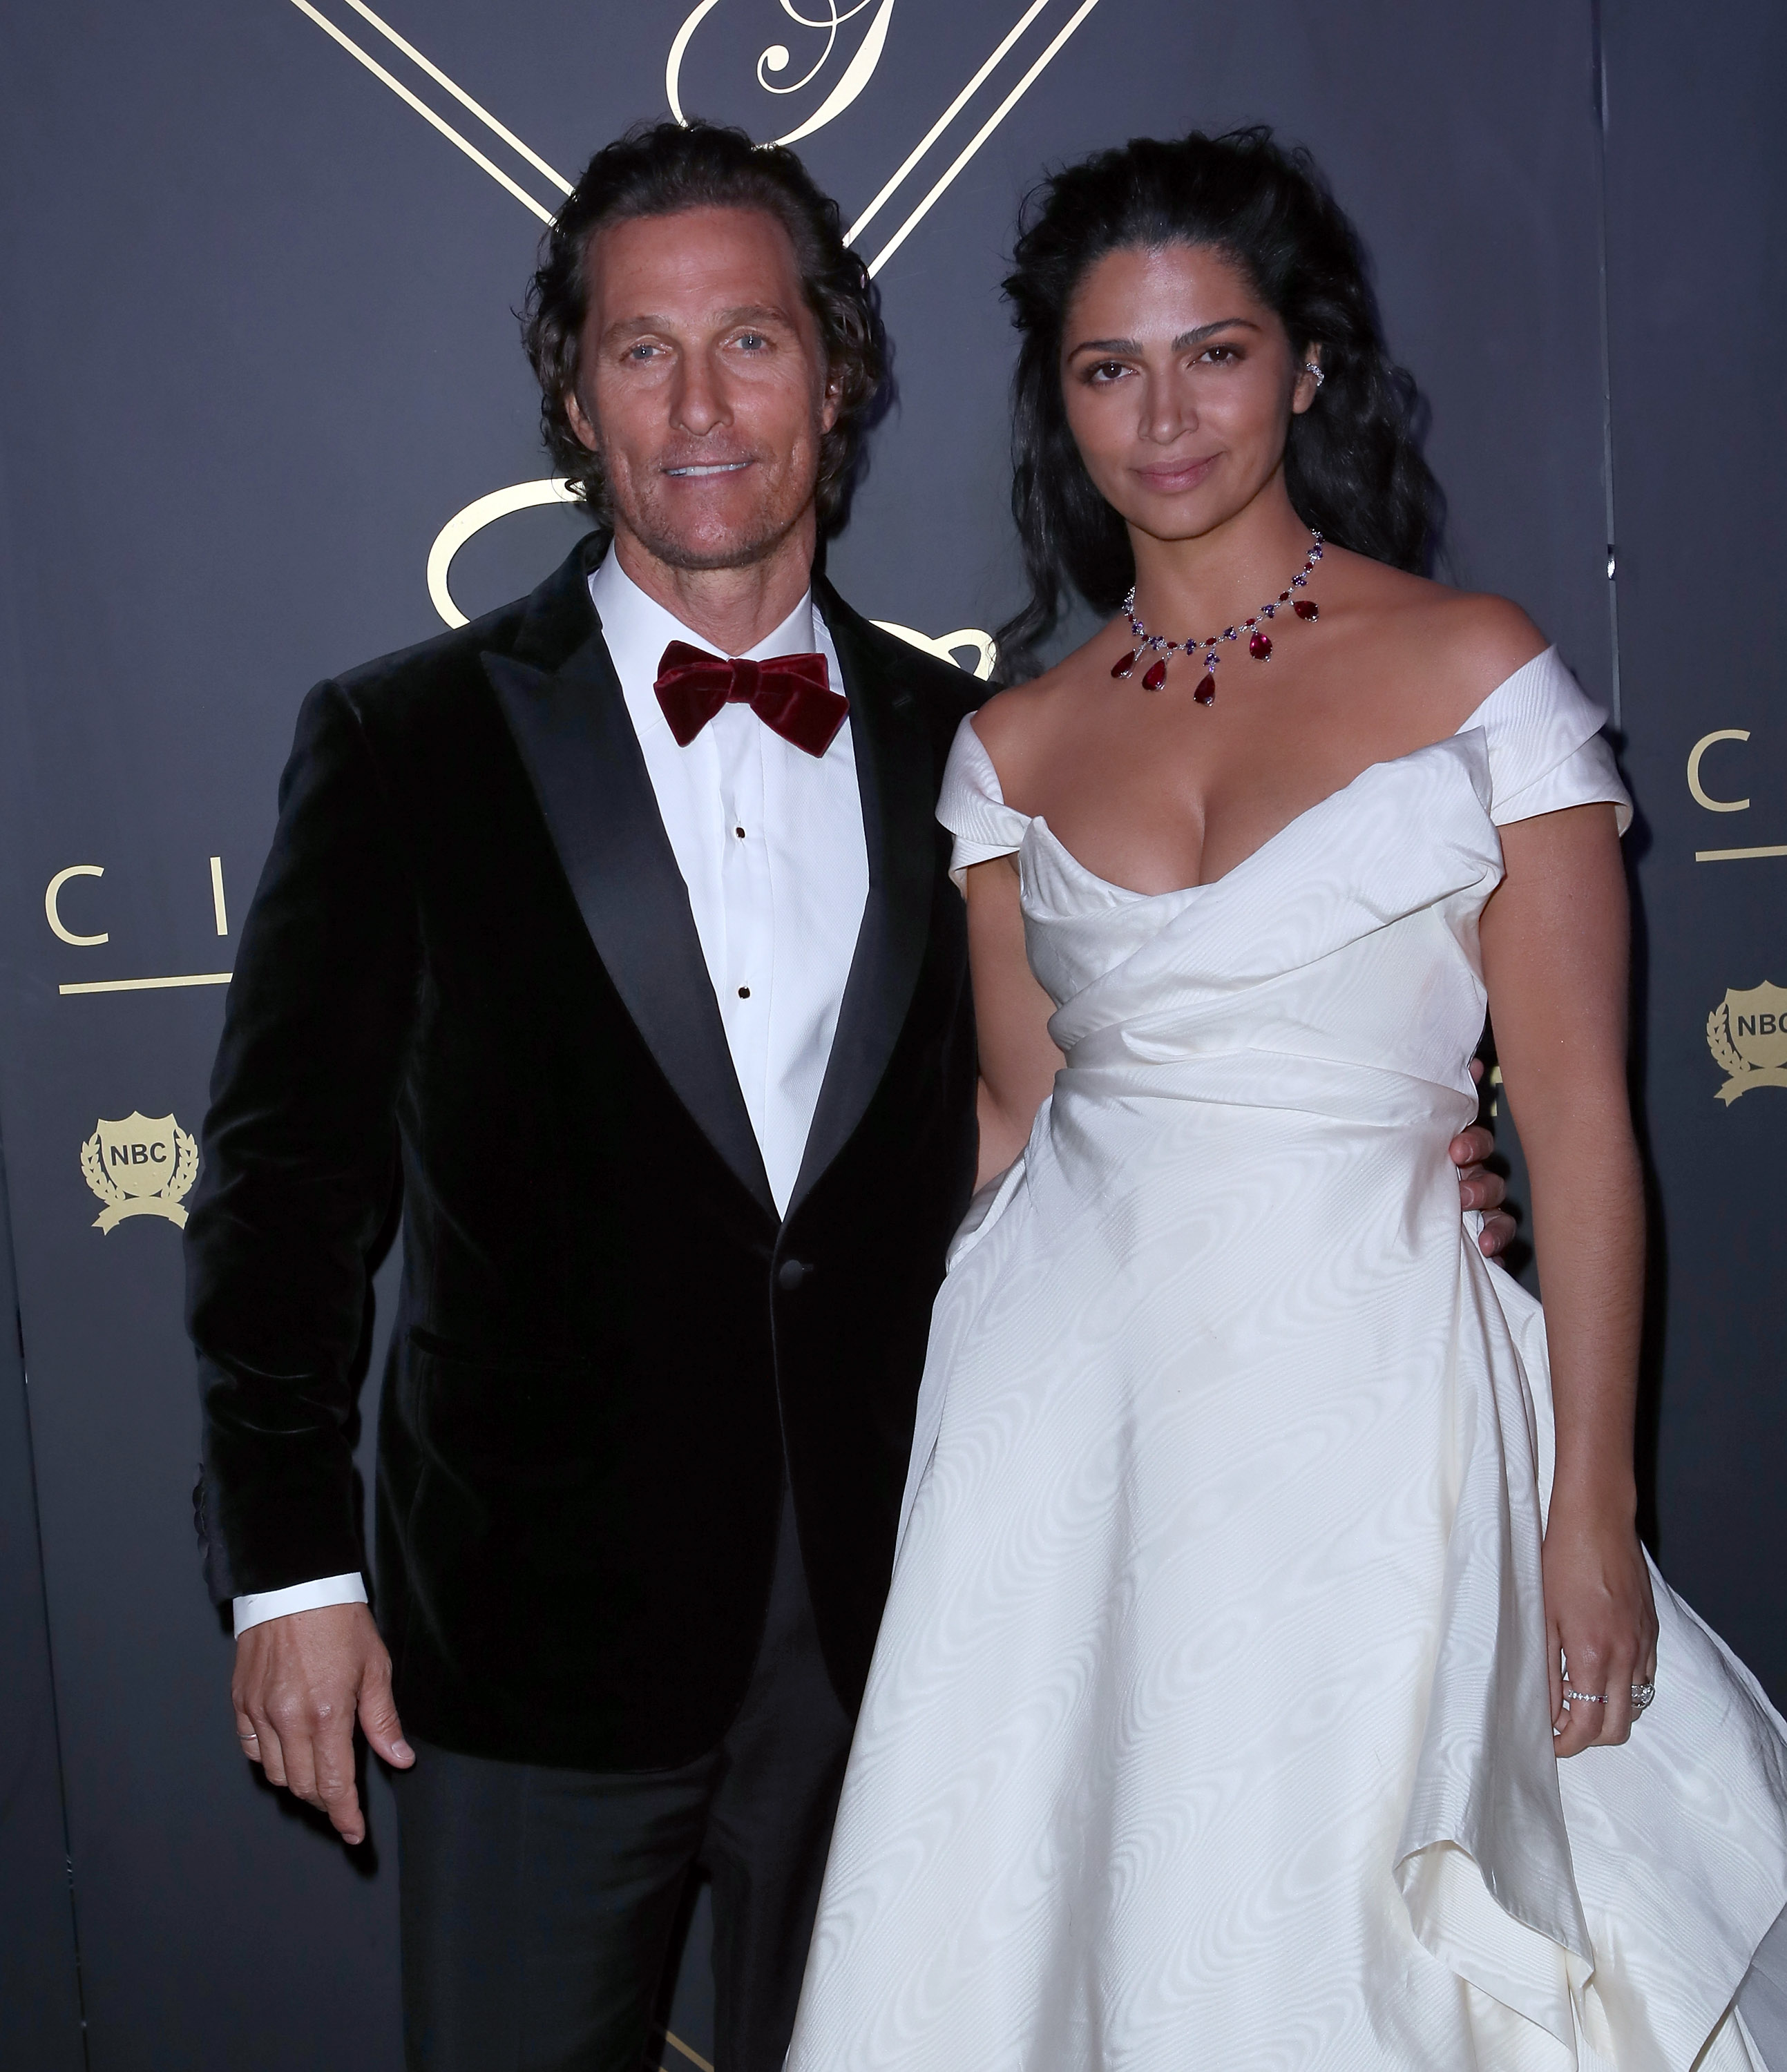 Matthew McConaughey and Camila Alves attend the City Gala at Universal Studios Hollywood in Universal City, California, on March 4, 2018. | Source: Getty Images